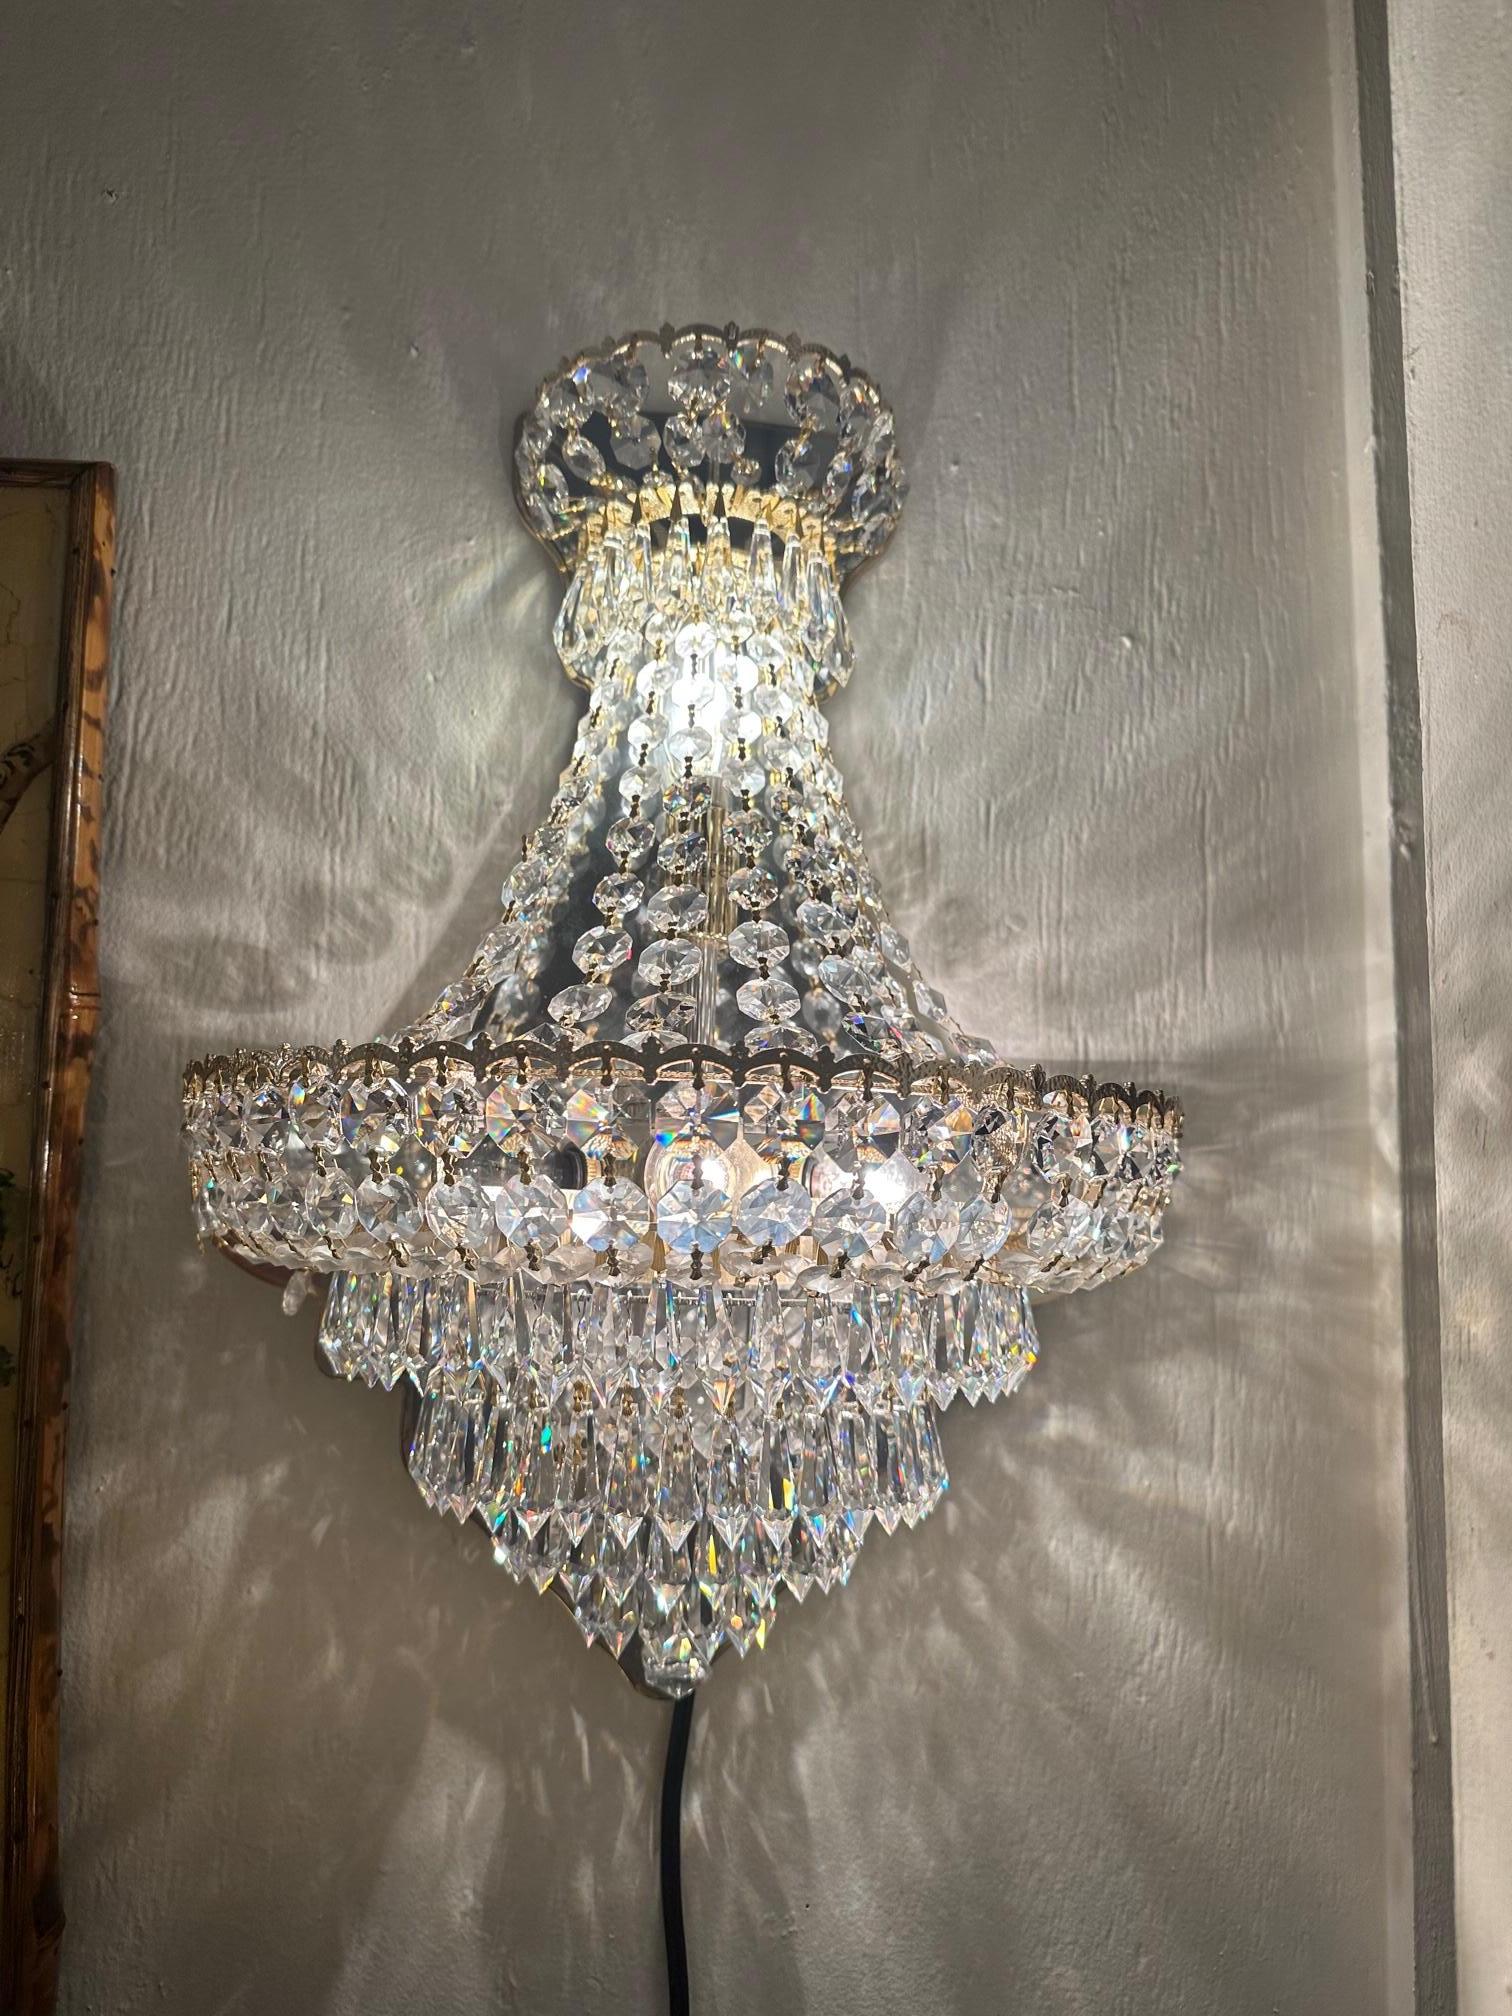 Moviestar glamorous pair of glistening ornate Schonbek sconces having necklaces of dripping crystals and gold plated armature with 4 interior lights. Discontinued in 2013 because of unavailablity of the crytals. These were never used, and originally